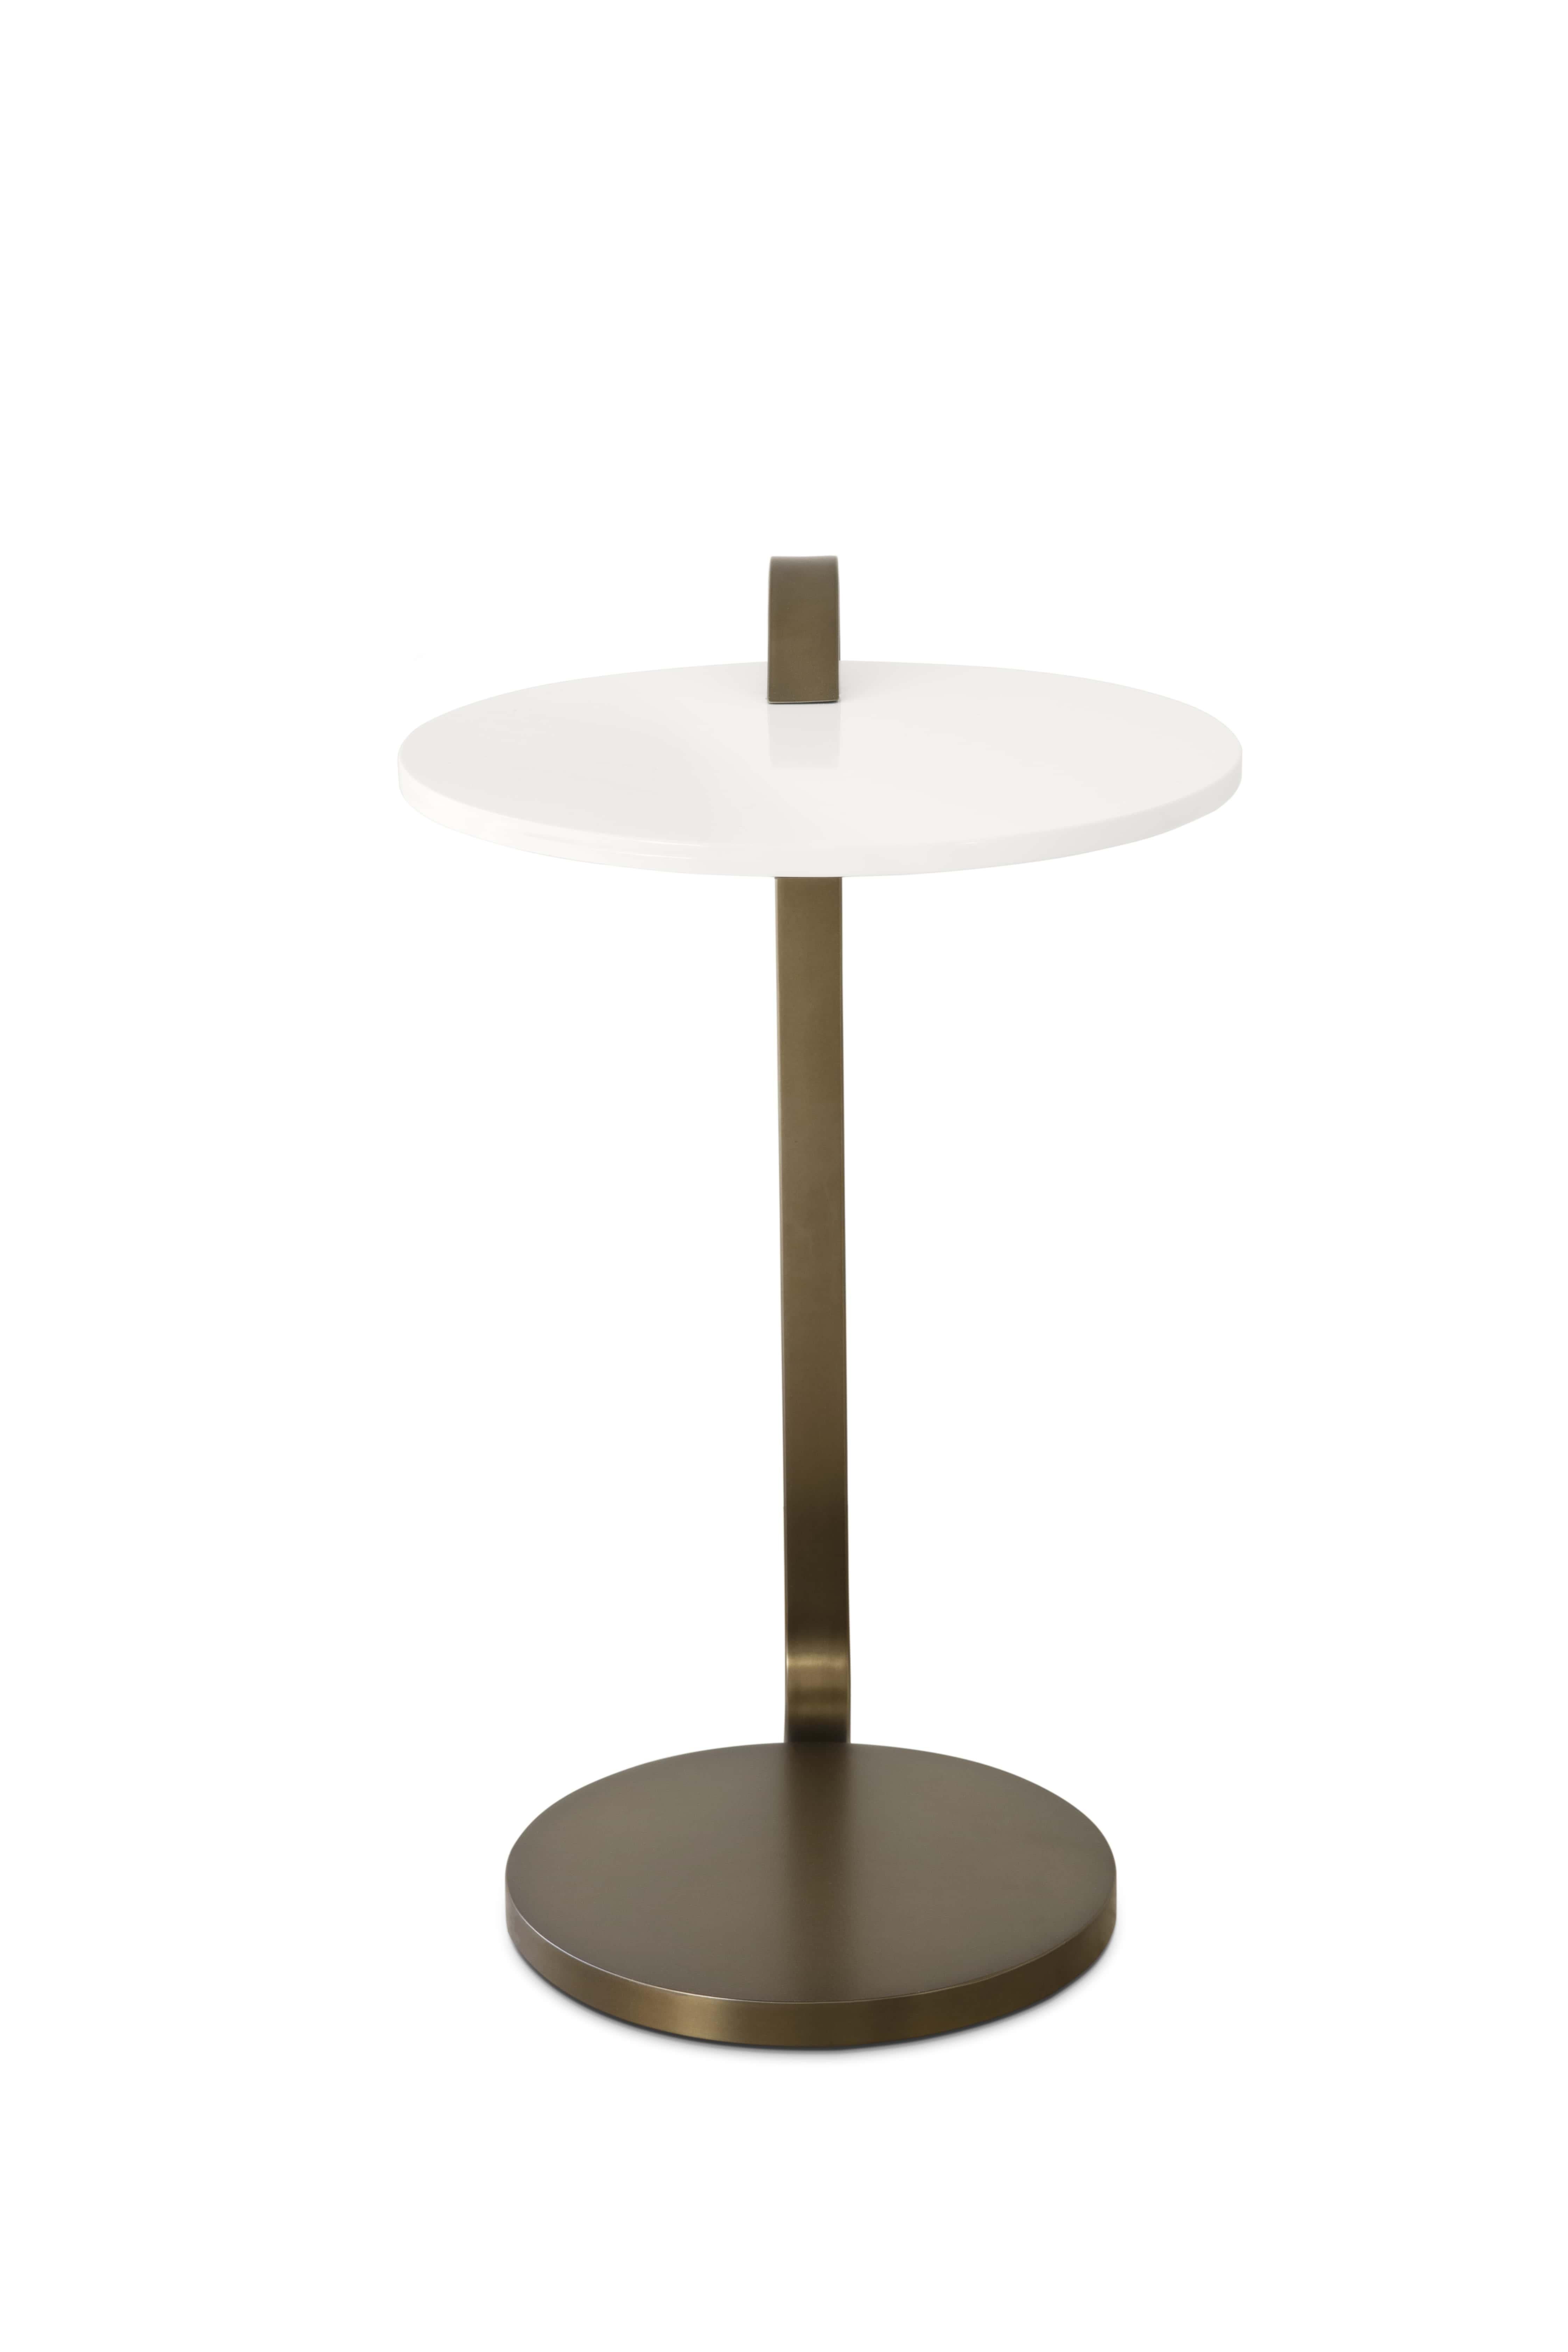 Modern Minimalist Cream Glossy Lacquer Cutty Side Table by Caffe Latte For Sale